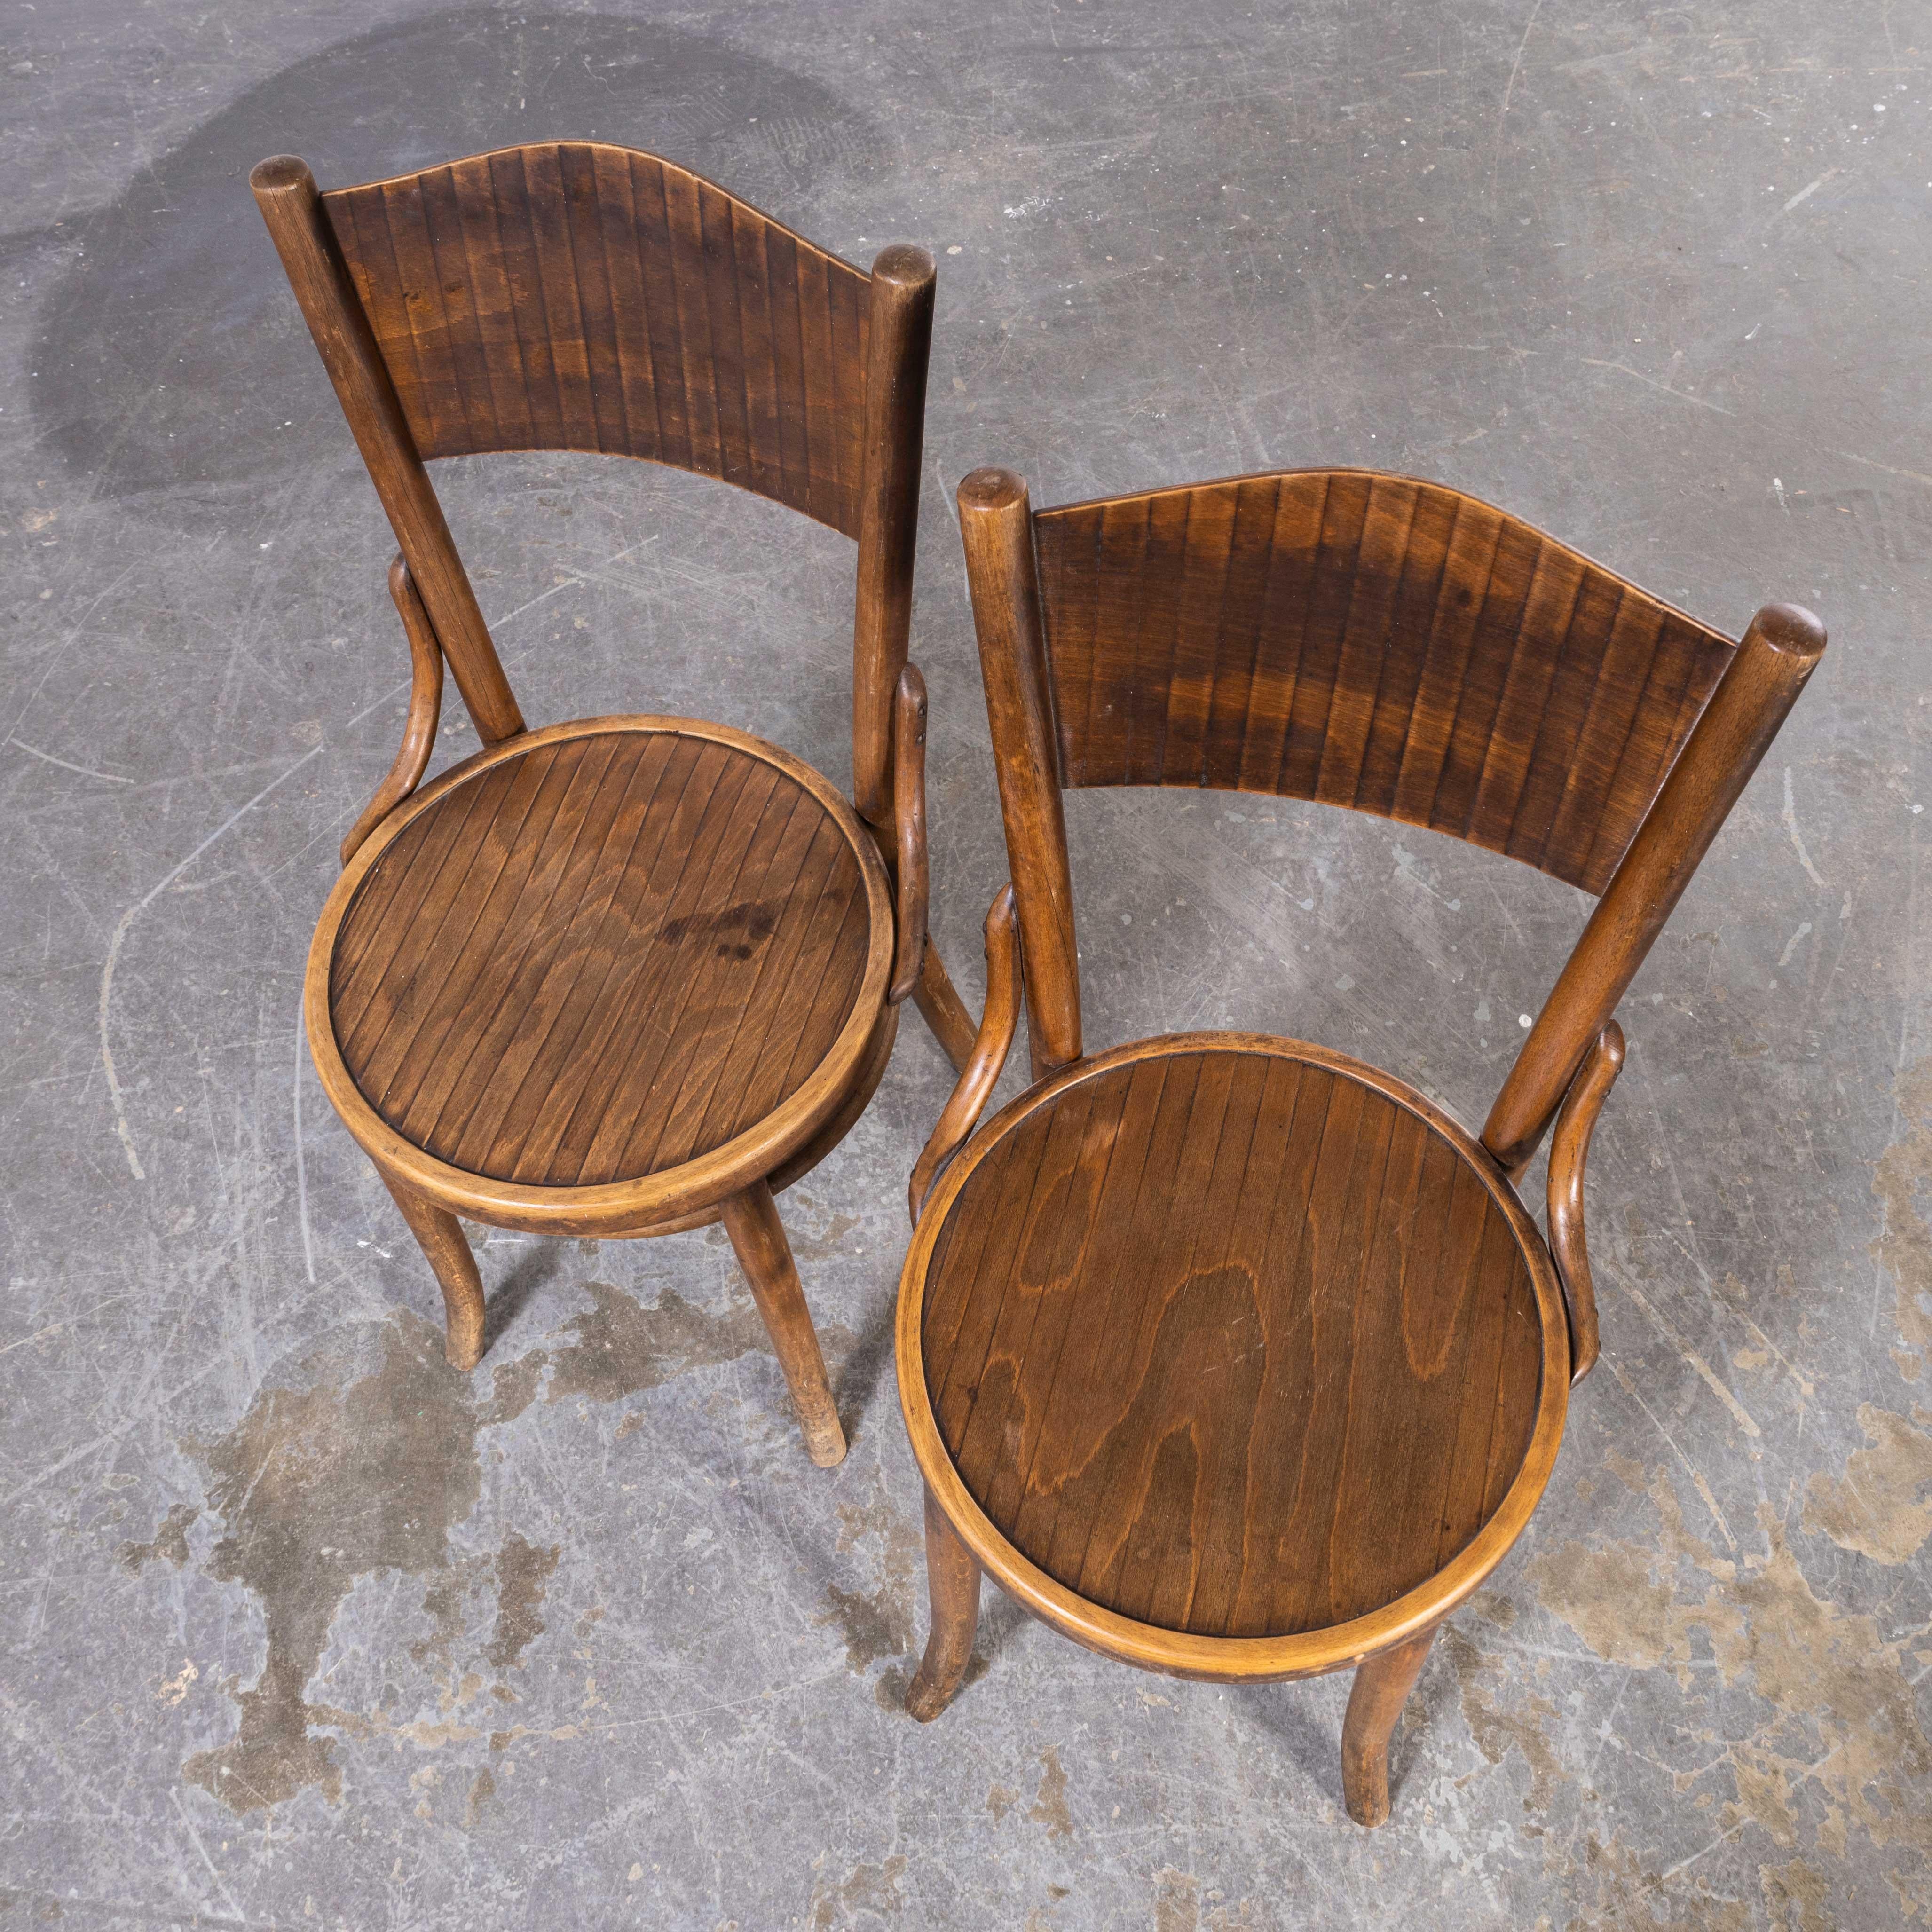 1940’s Bentwood Debrecen moustache back dining chairs – pair
1940’s Bentwood Debrecen moustache back dining chairs – pair. It is hard to be precise about the origin of these chairs as little history is known, but what we do know is at the beginning